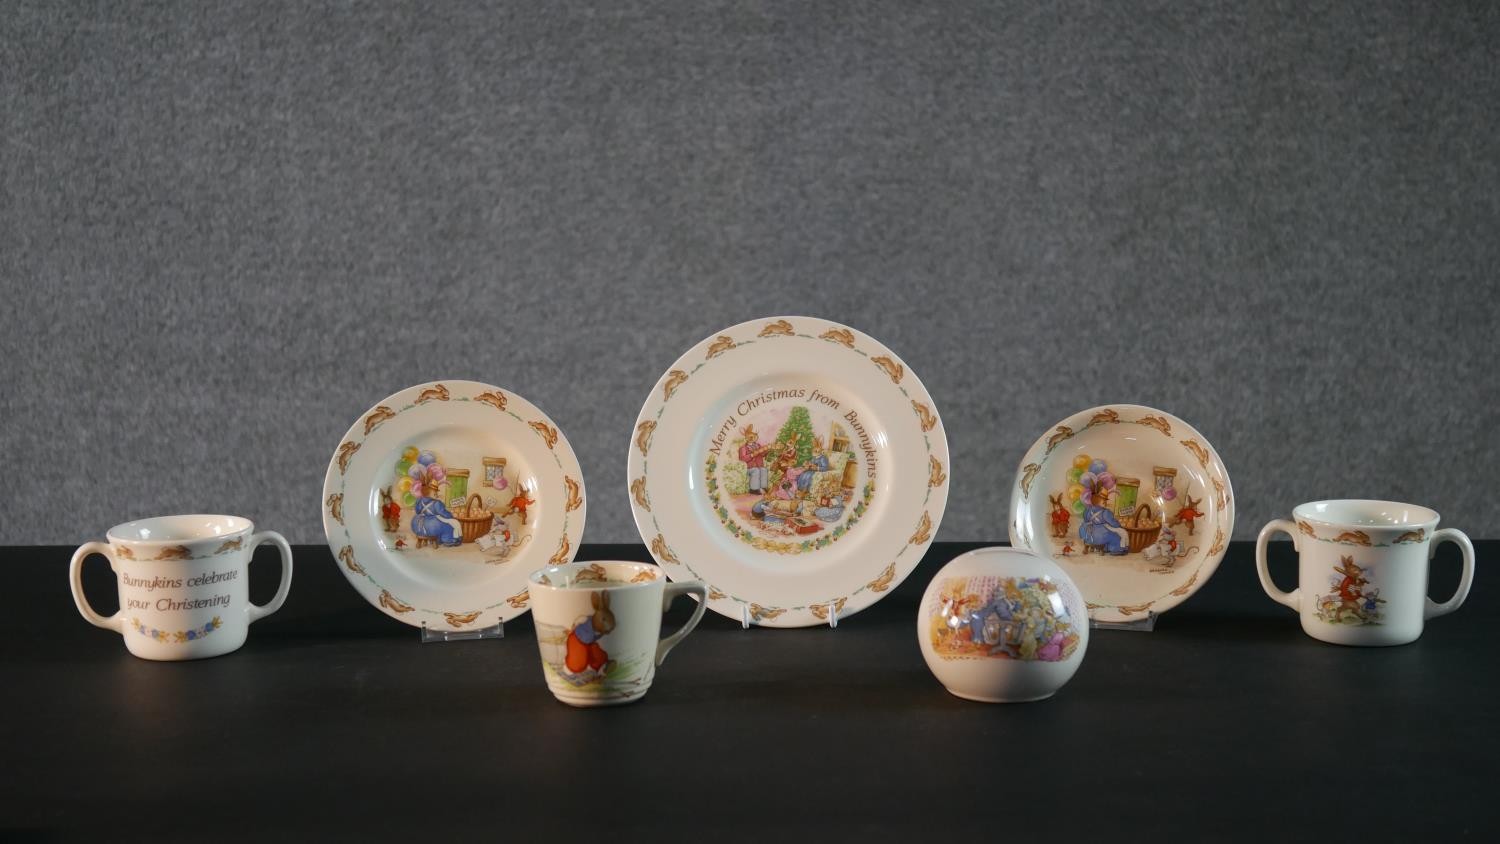 A collection of Royal Doulton Bunnykins pattern child's crockery, includes three cups, a moneybox, a